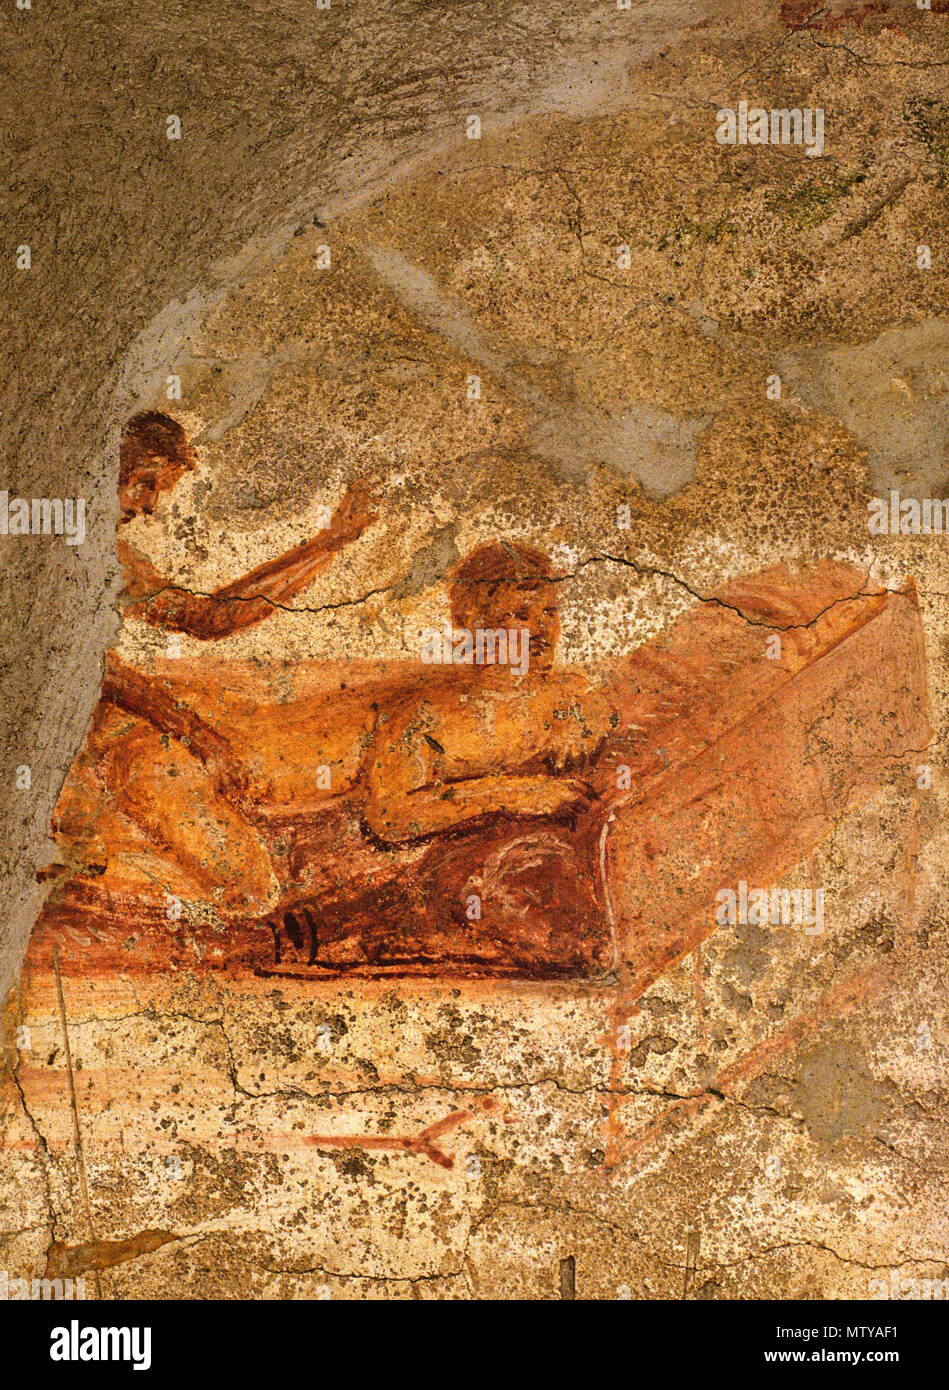 . English: Couple in bed. Woman in a tergo position. Fresco from south wall above entrance to room e in the Lupanar in Pompeii. Ca. 70-79 AD. 21 July 2010. WolfgangRieger 492 Pompeii - Lupanar - Couple4 Stock Photo